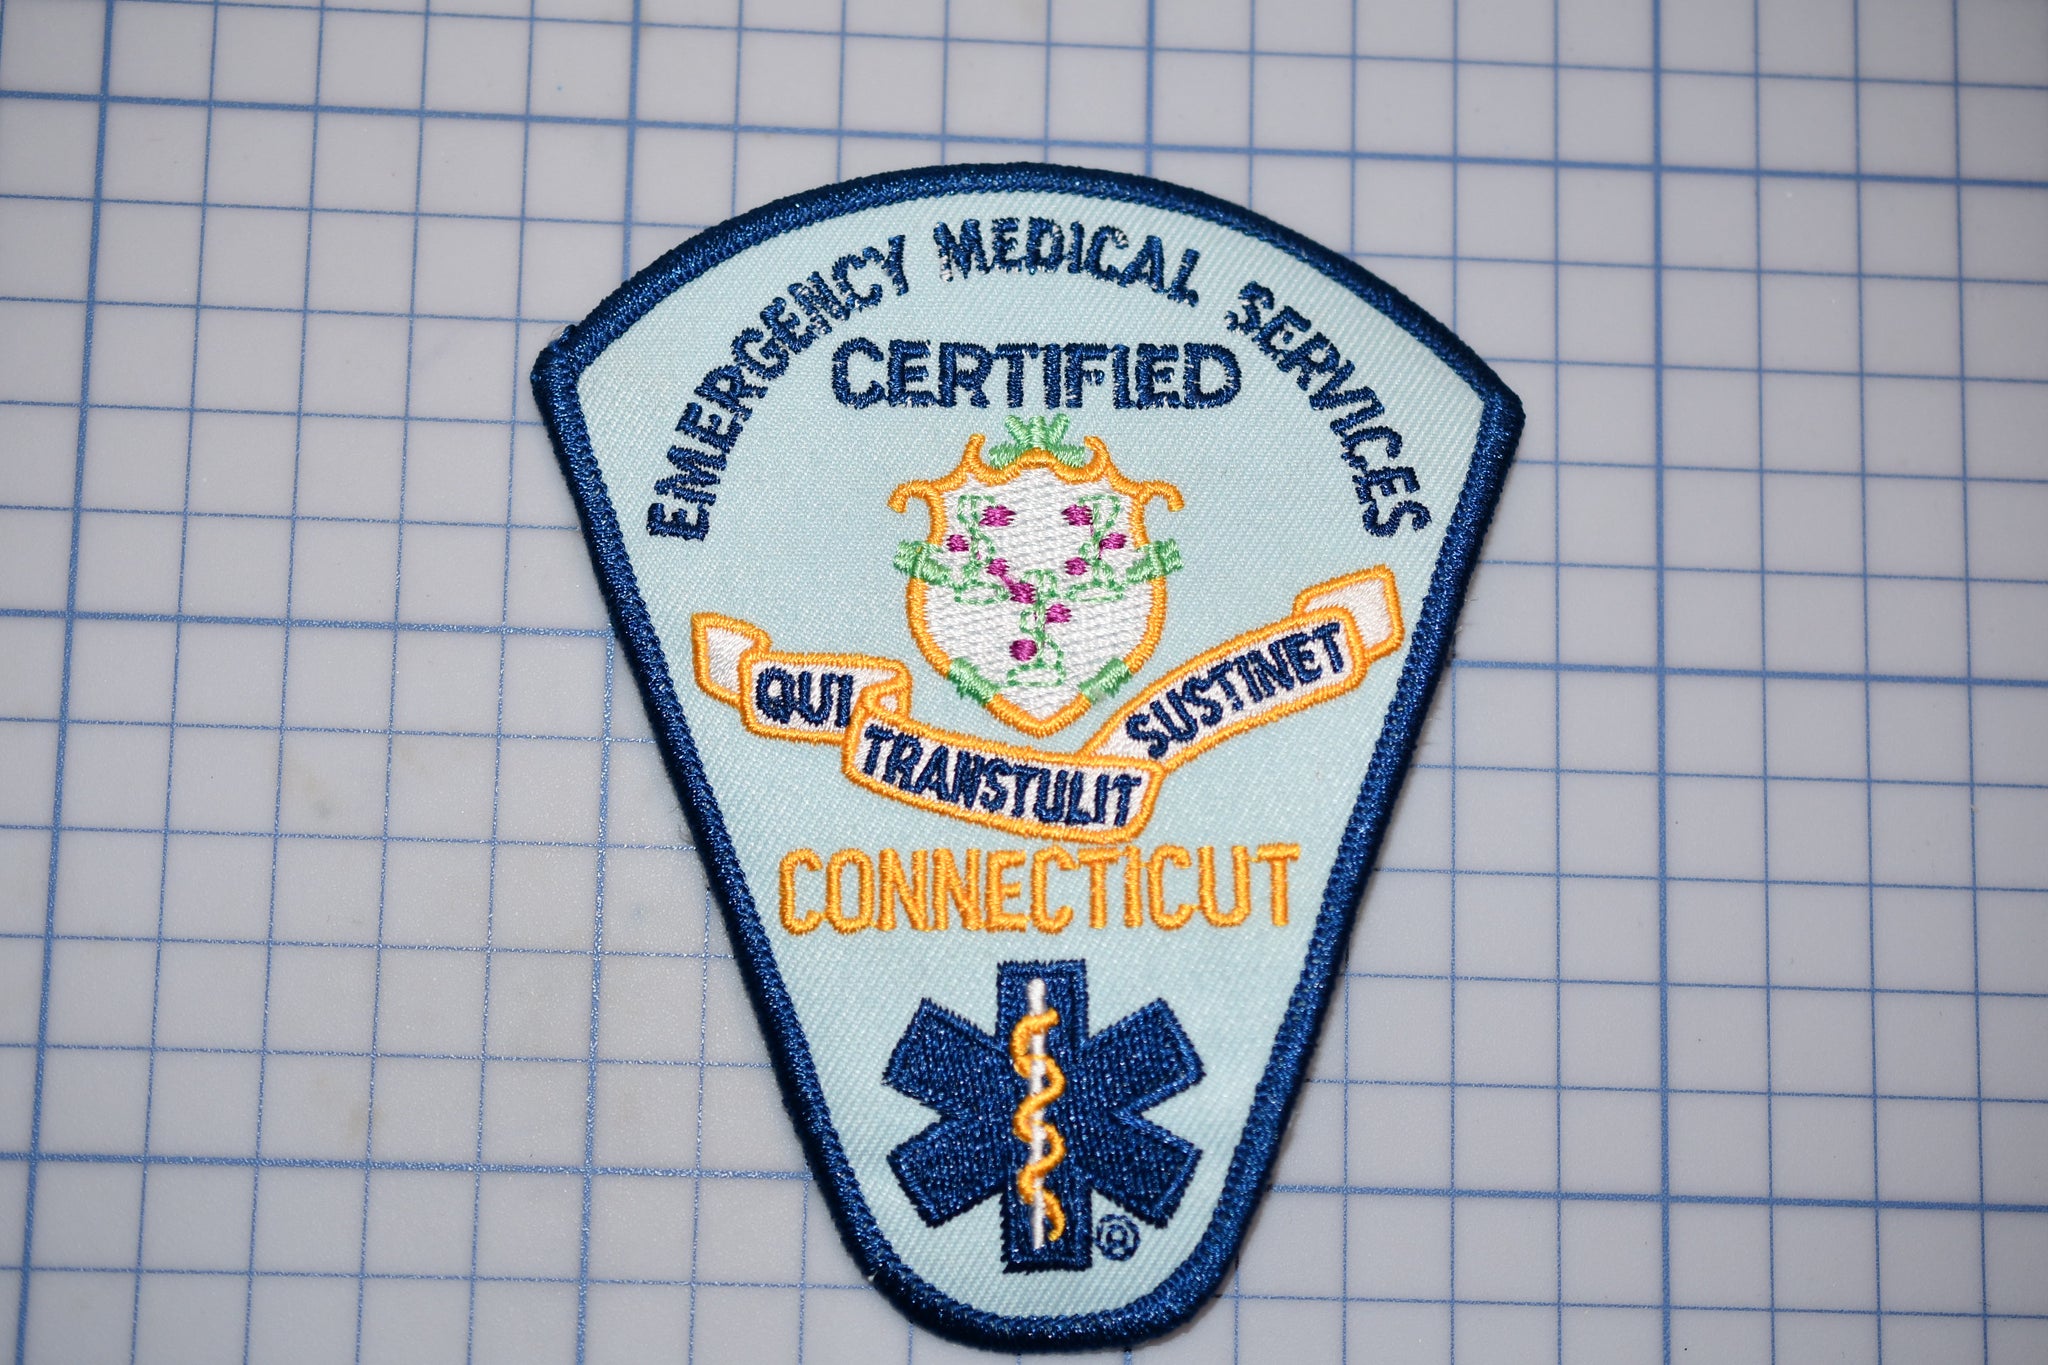 Emergency Medical Services Certified Connecticut Patch (B29-340)